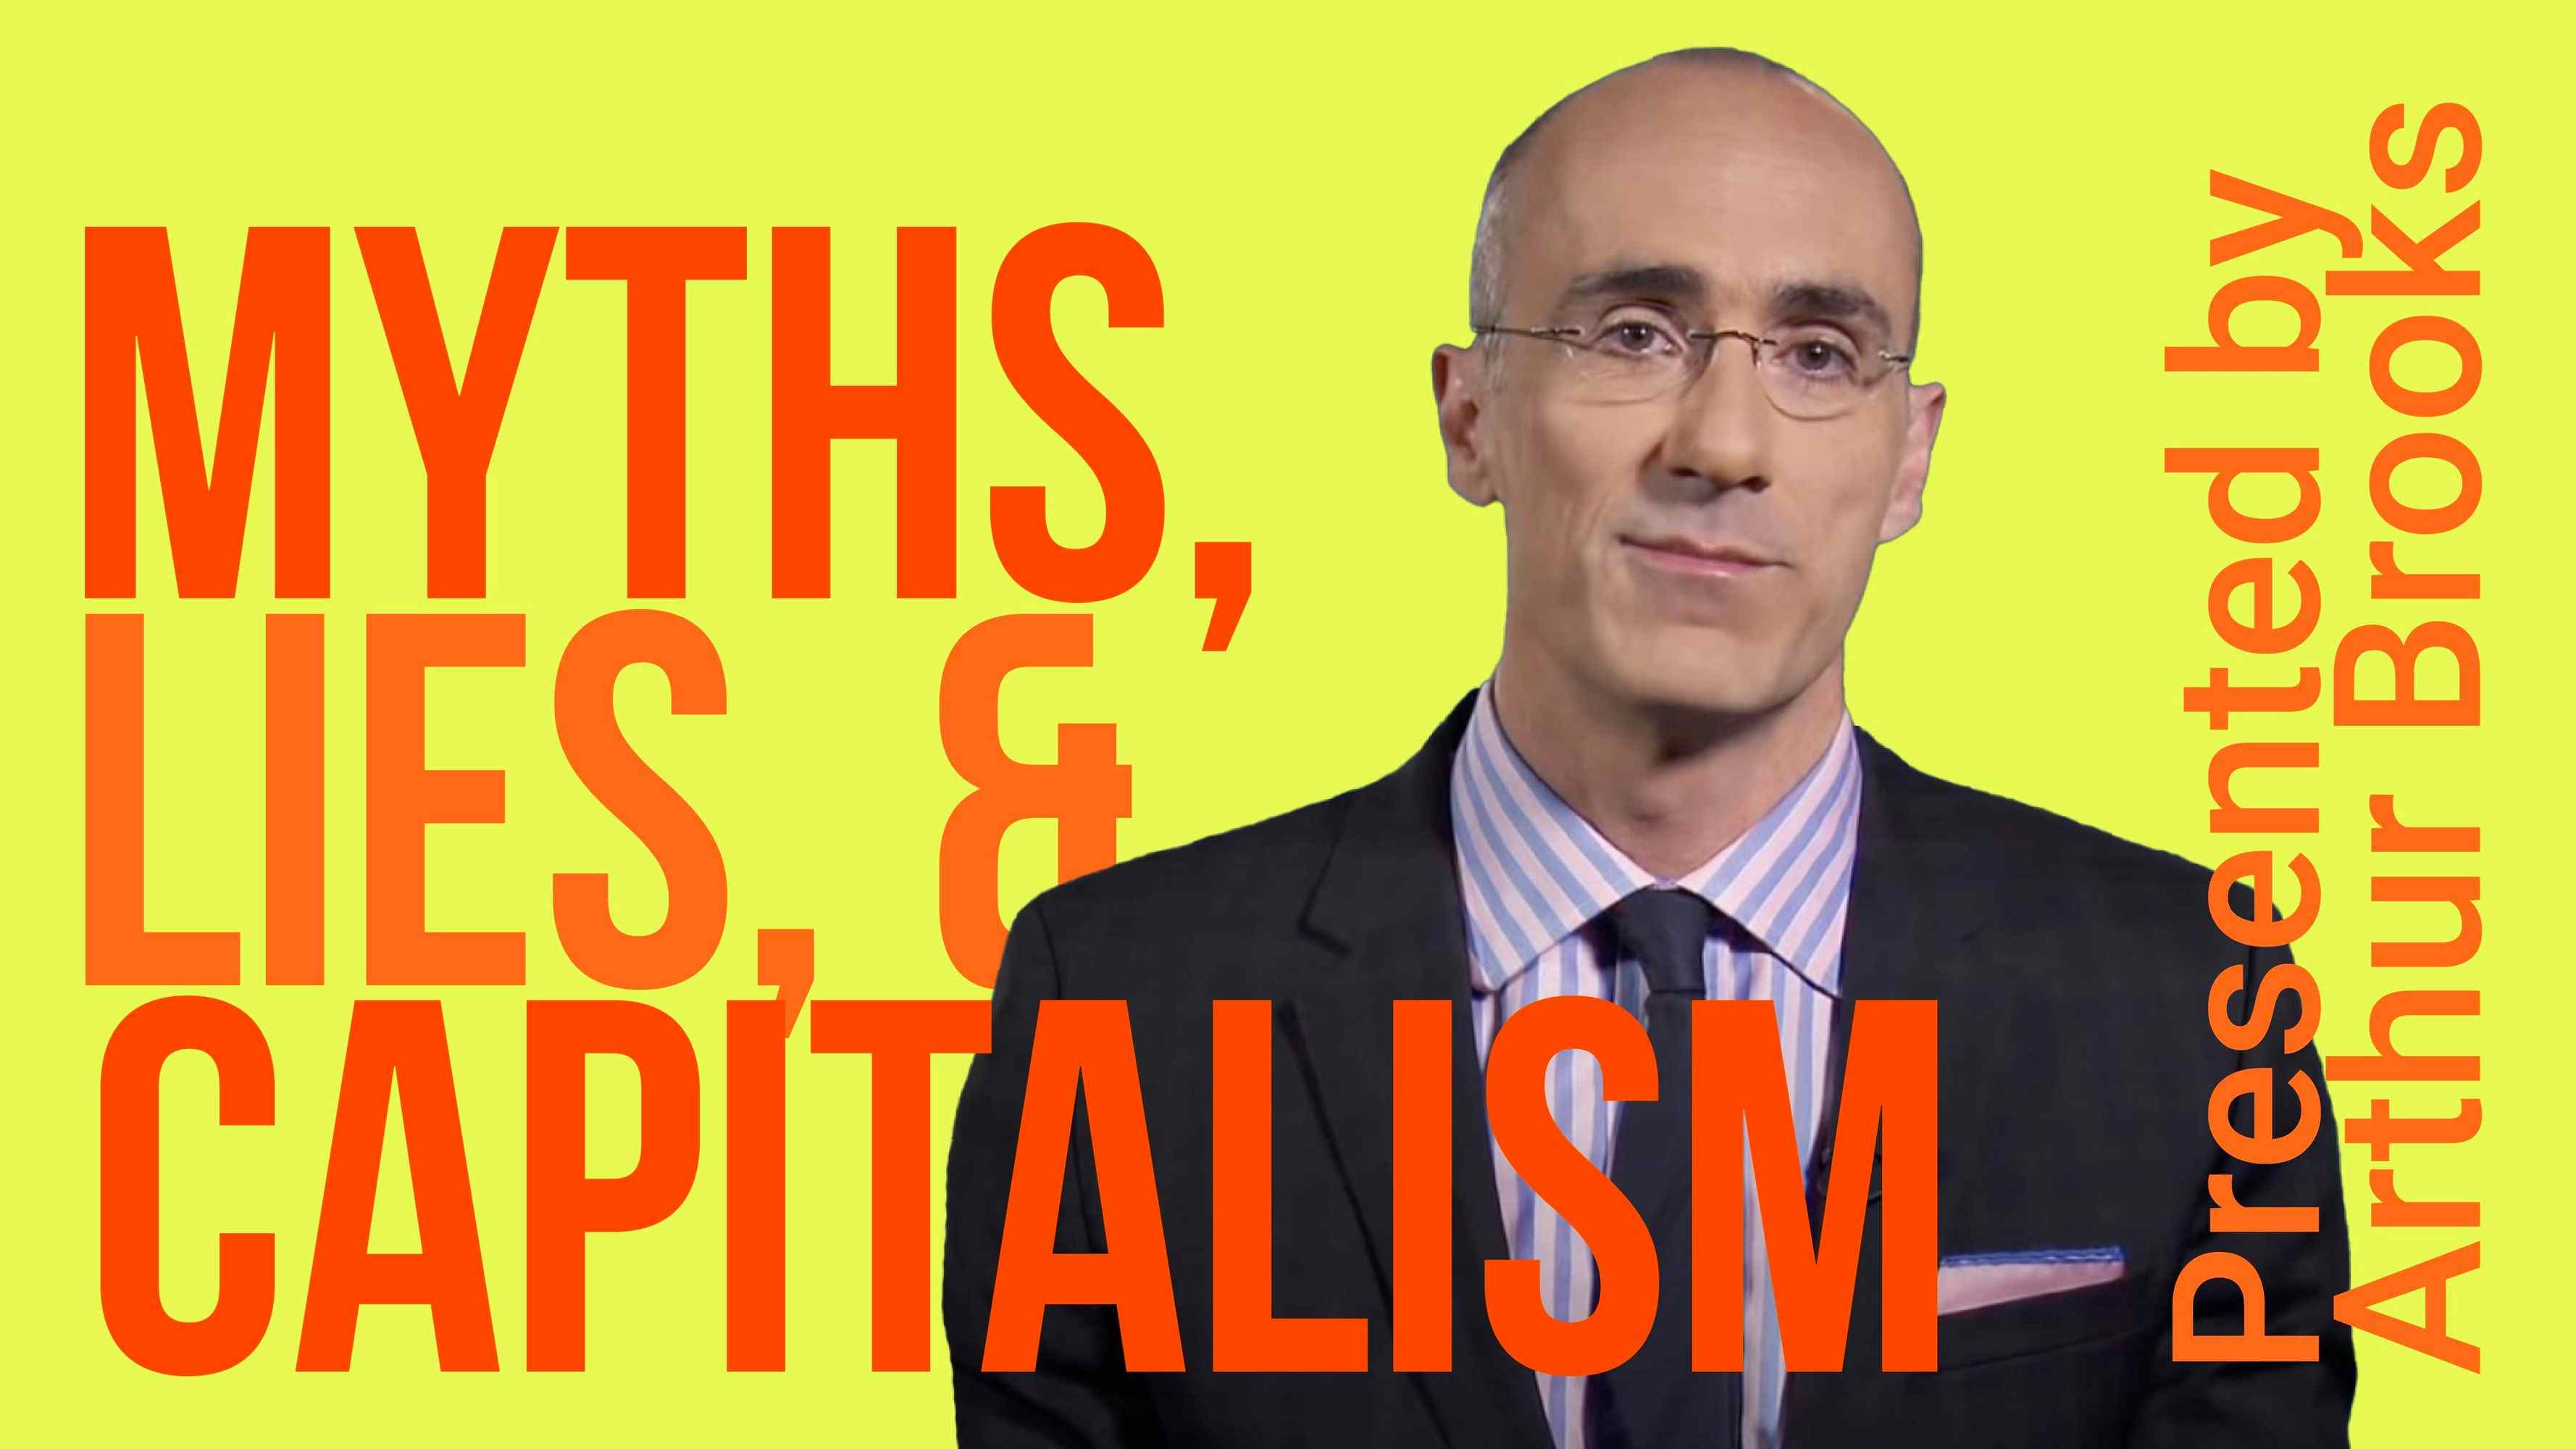 Myths, Lies, and Capitalism